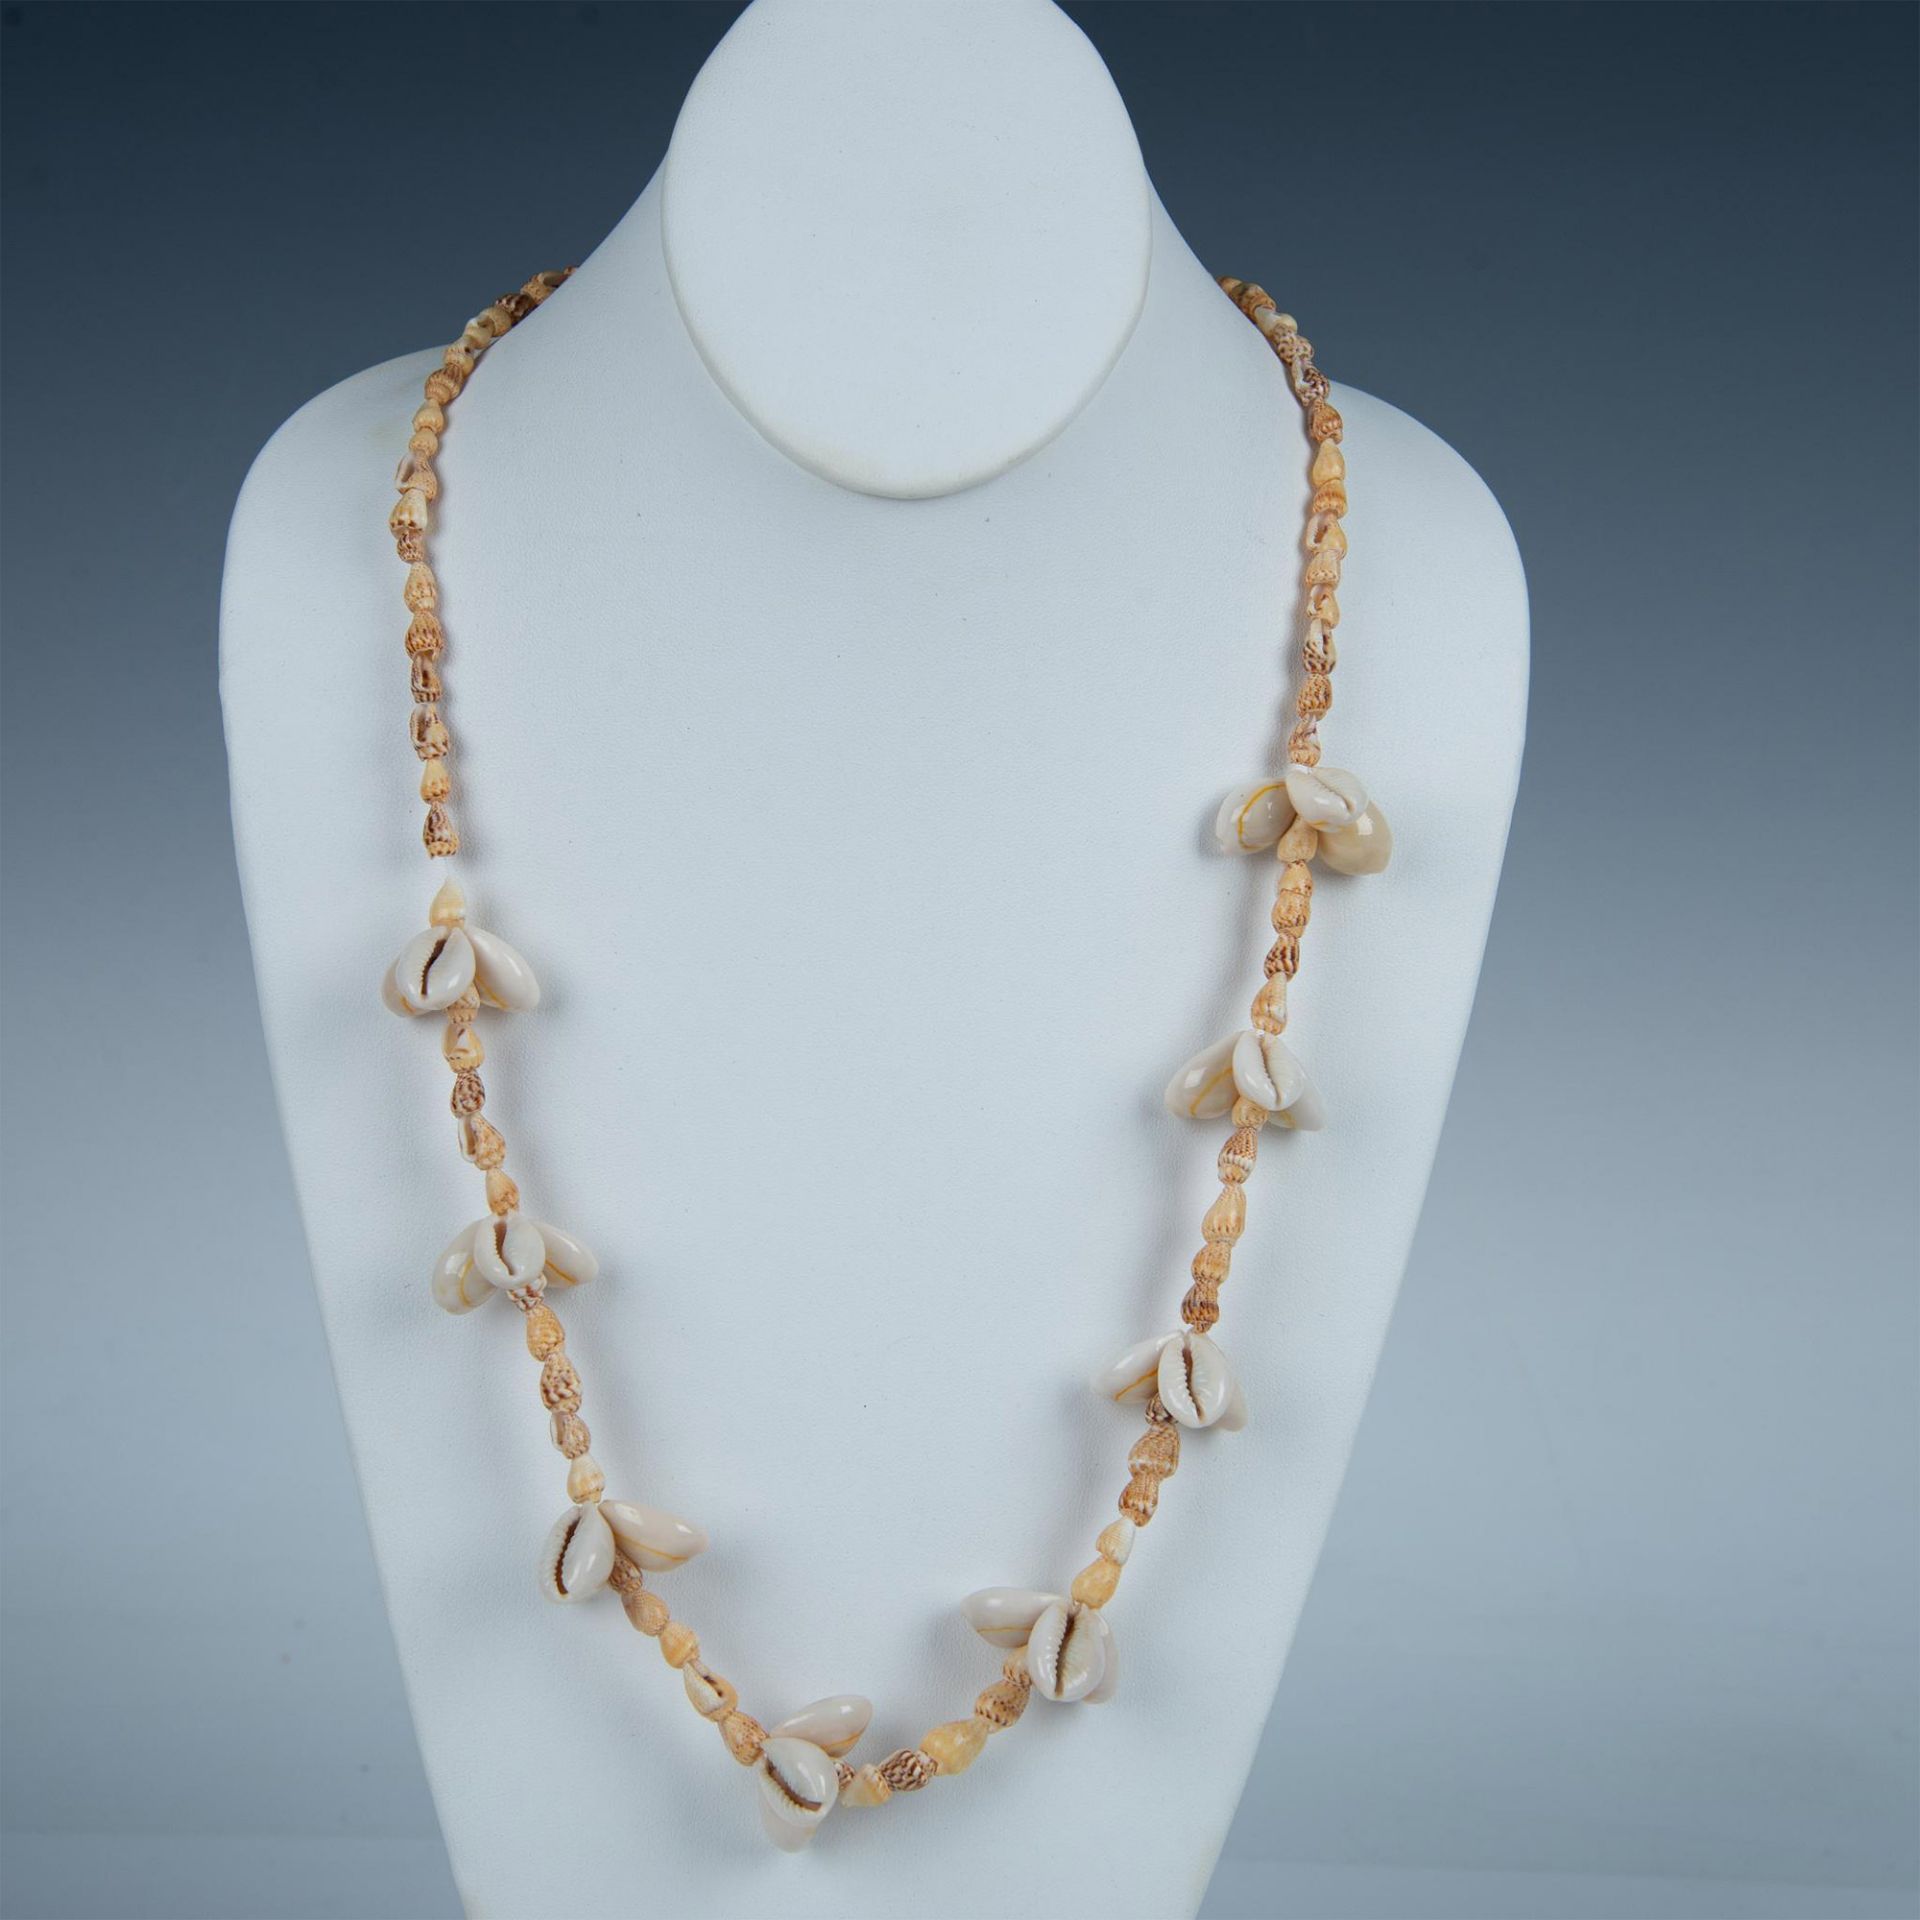 3pc Long Seashell Beach Necklaces - Image 4 of 4